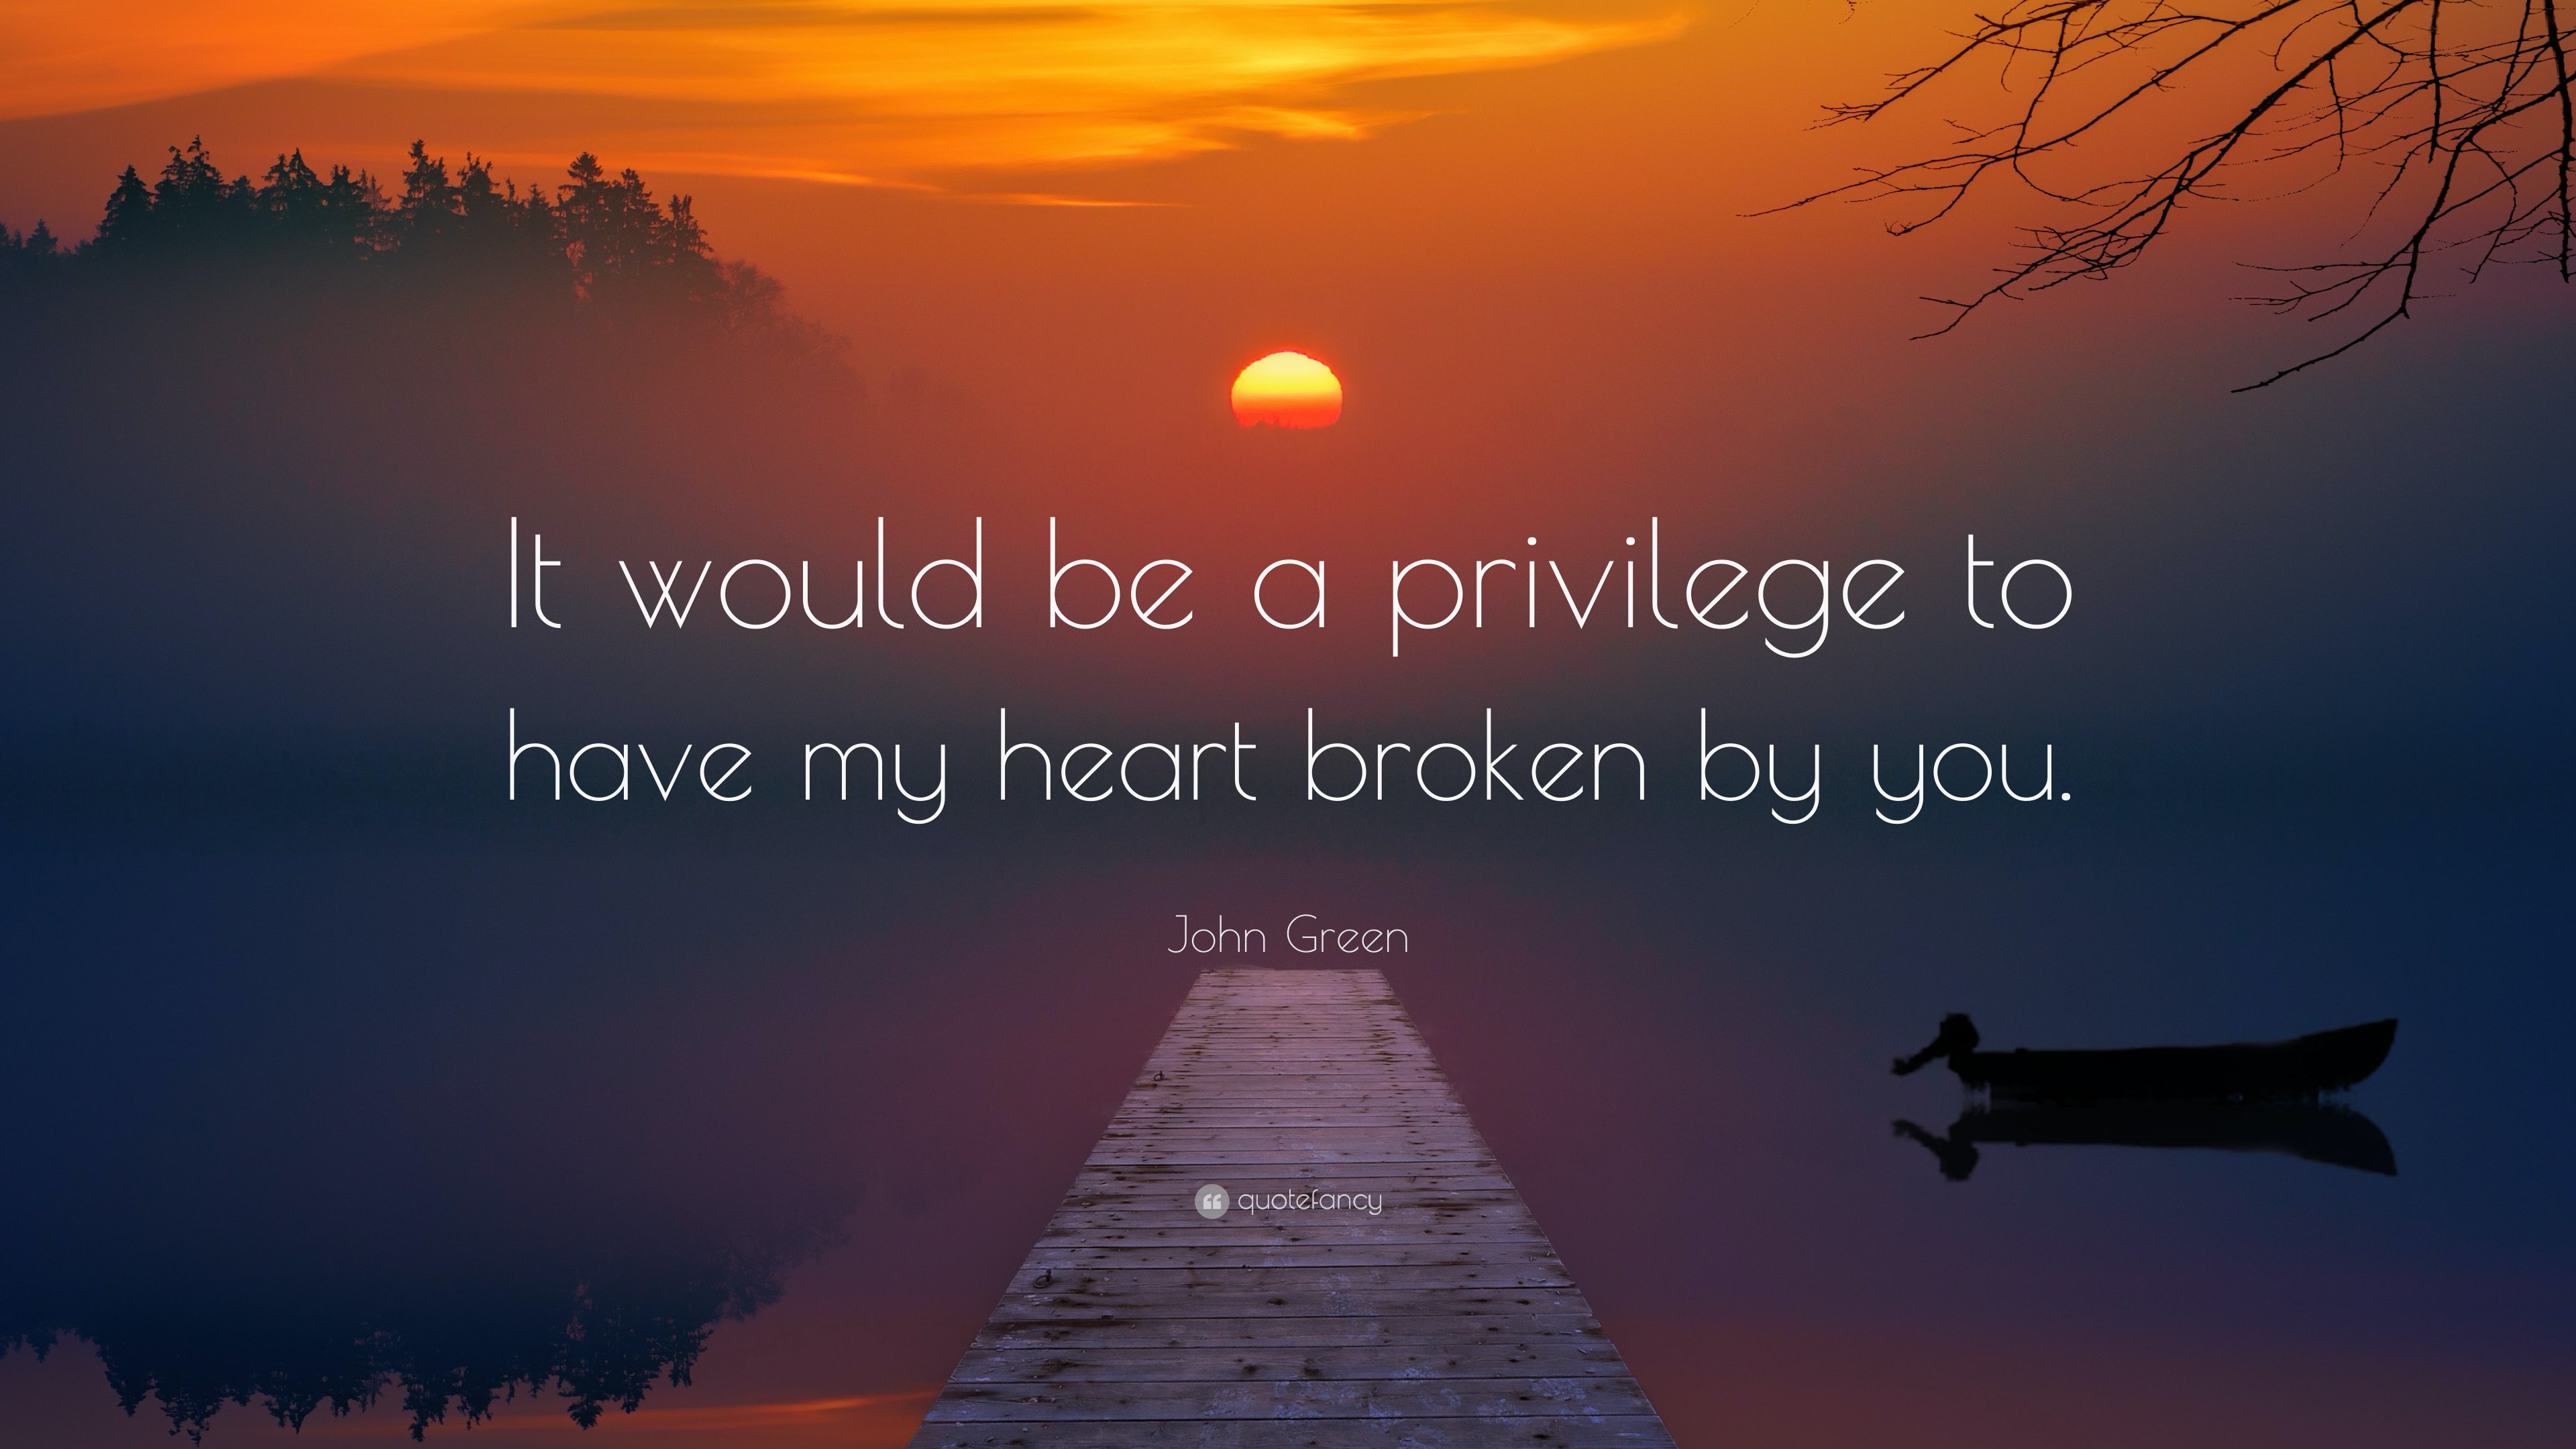 John Green Quote: “It would be a privilege to have my heart broken by you.”